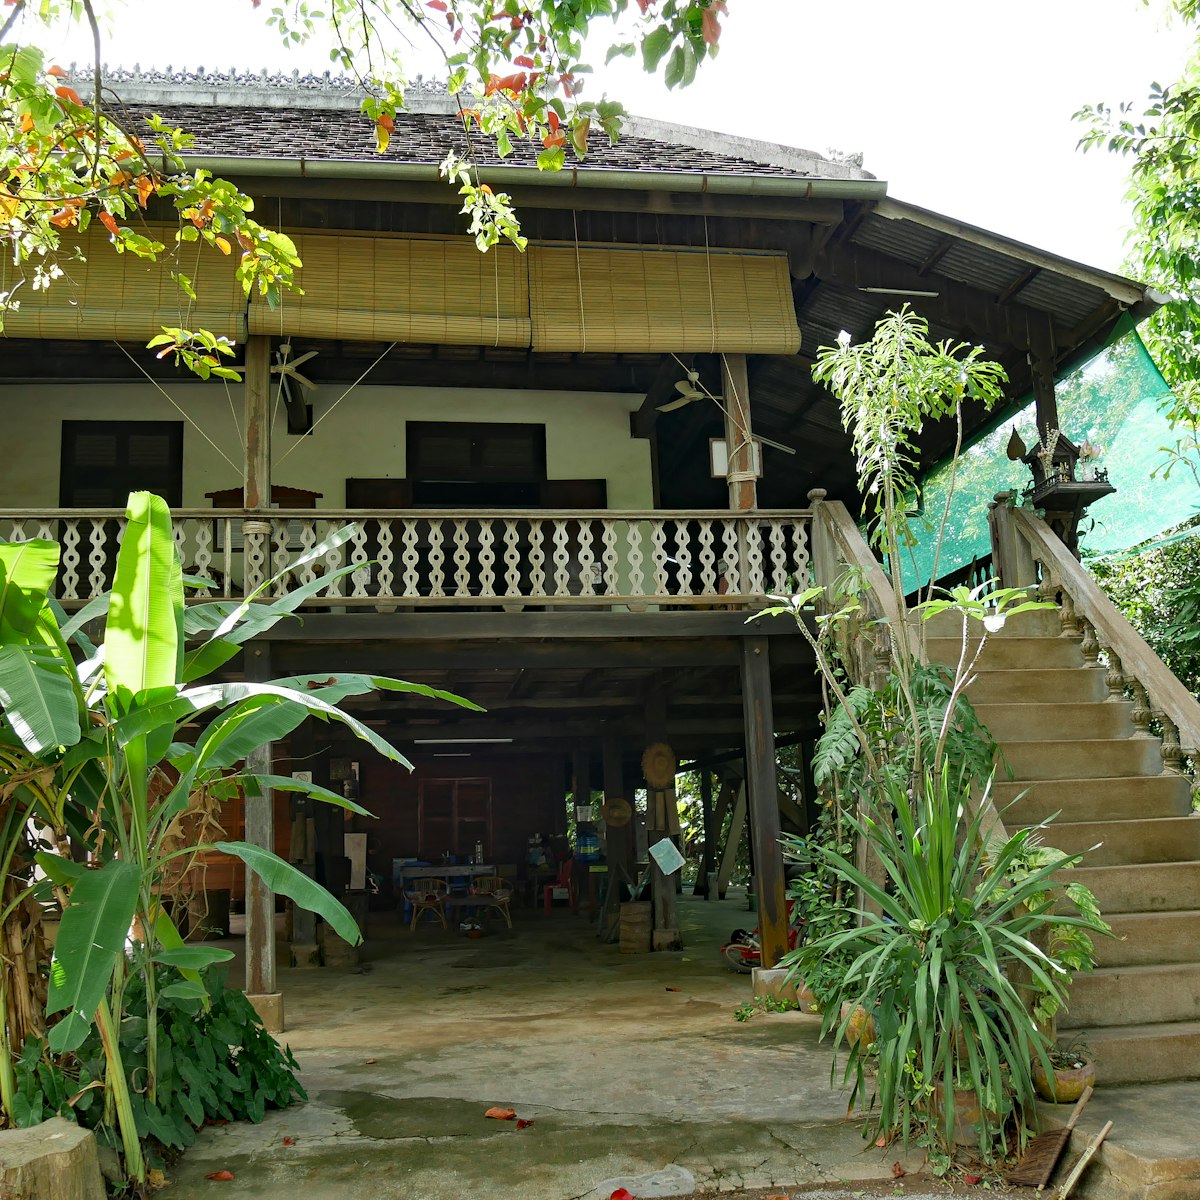 A one hundred year old Cambodian house built in the traditional Khmer style in Wat Kor Village, Battambang, Cambodia.